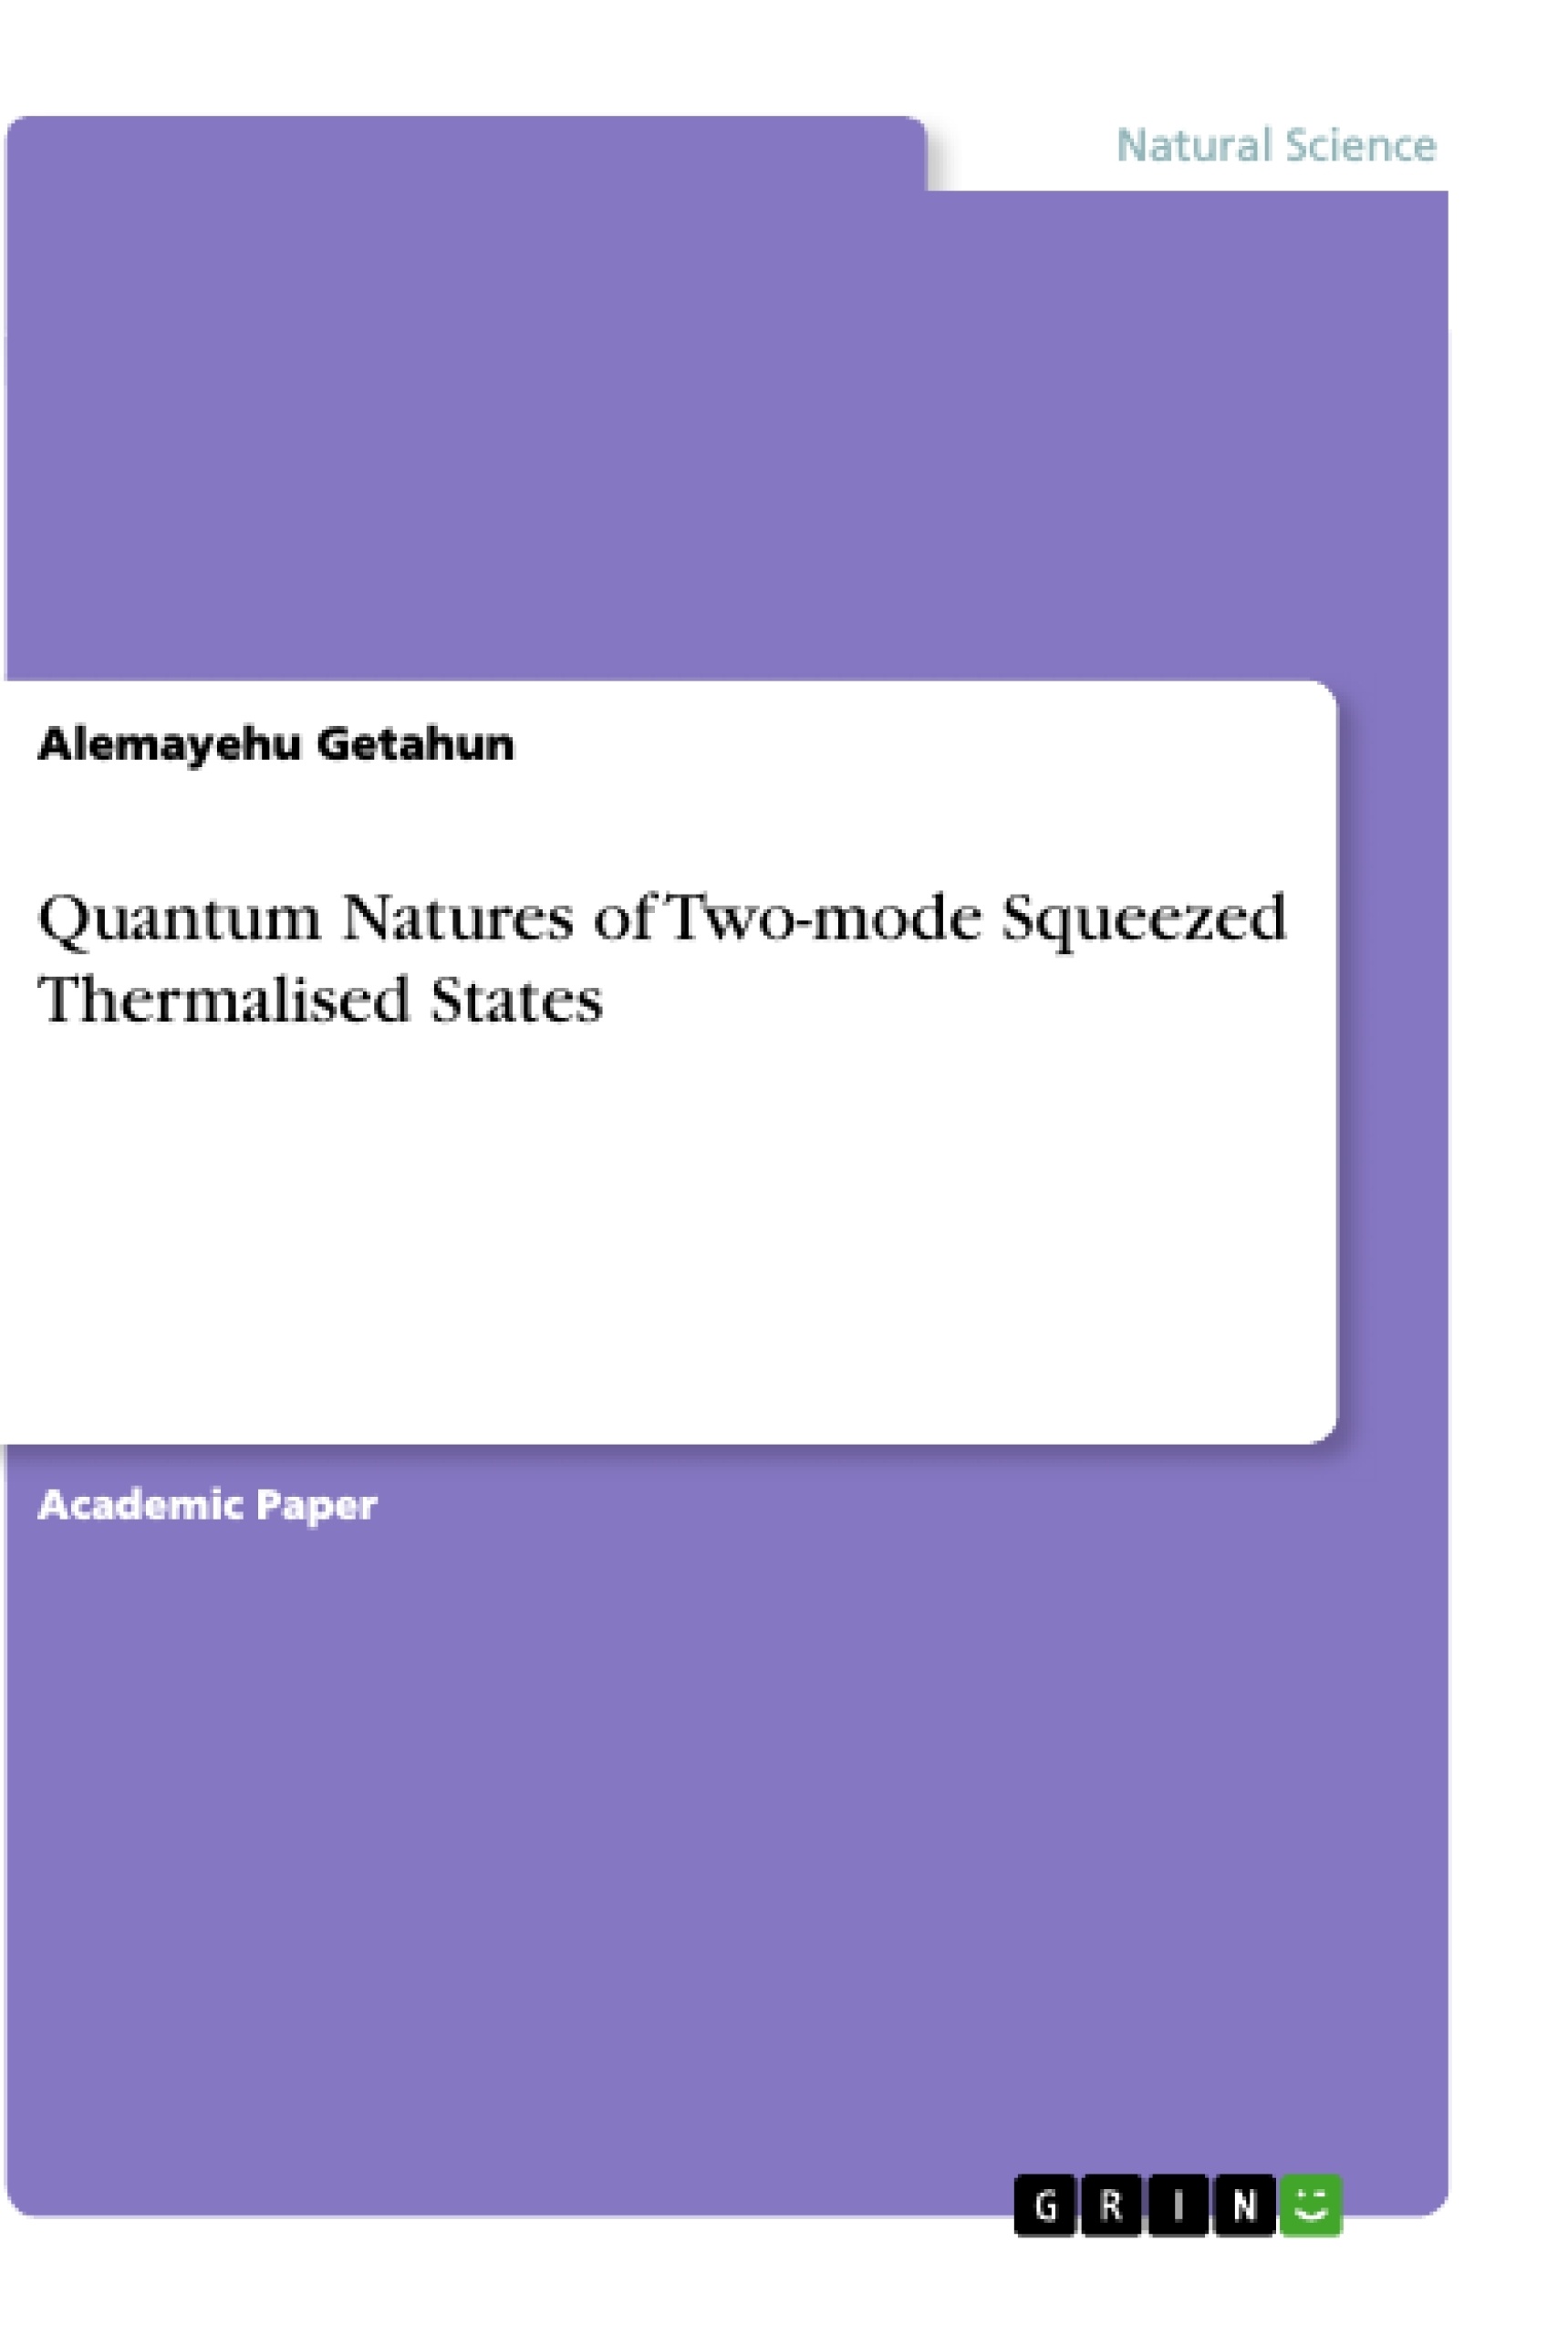 Título: Quantum Natures of Two-mode Squeezed Thermalised States